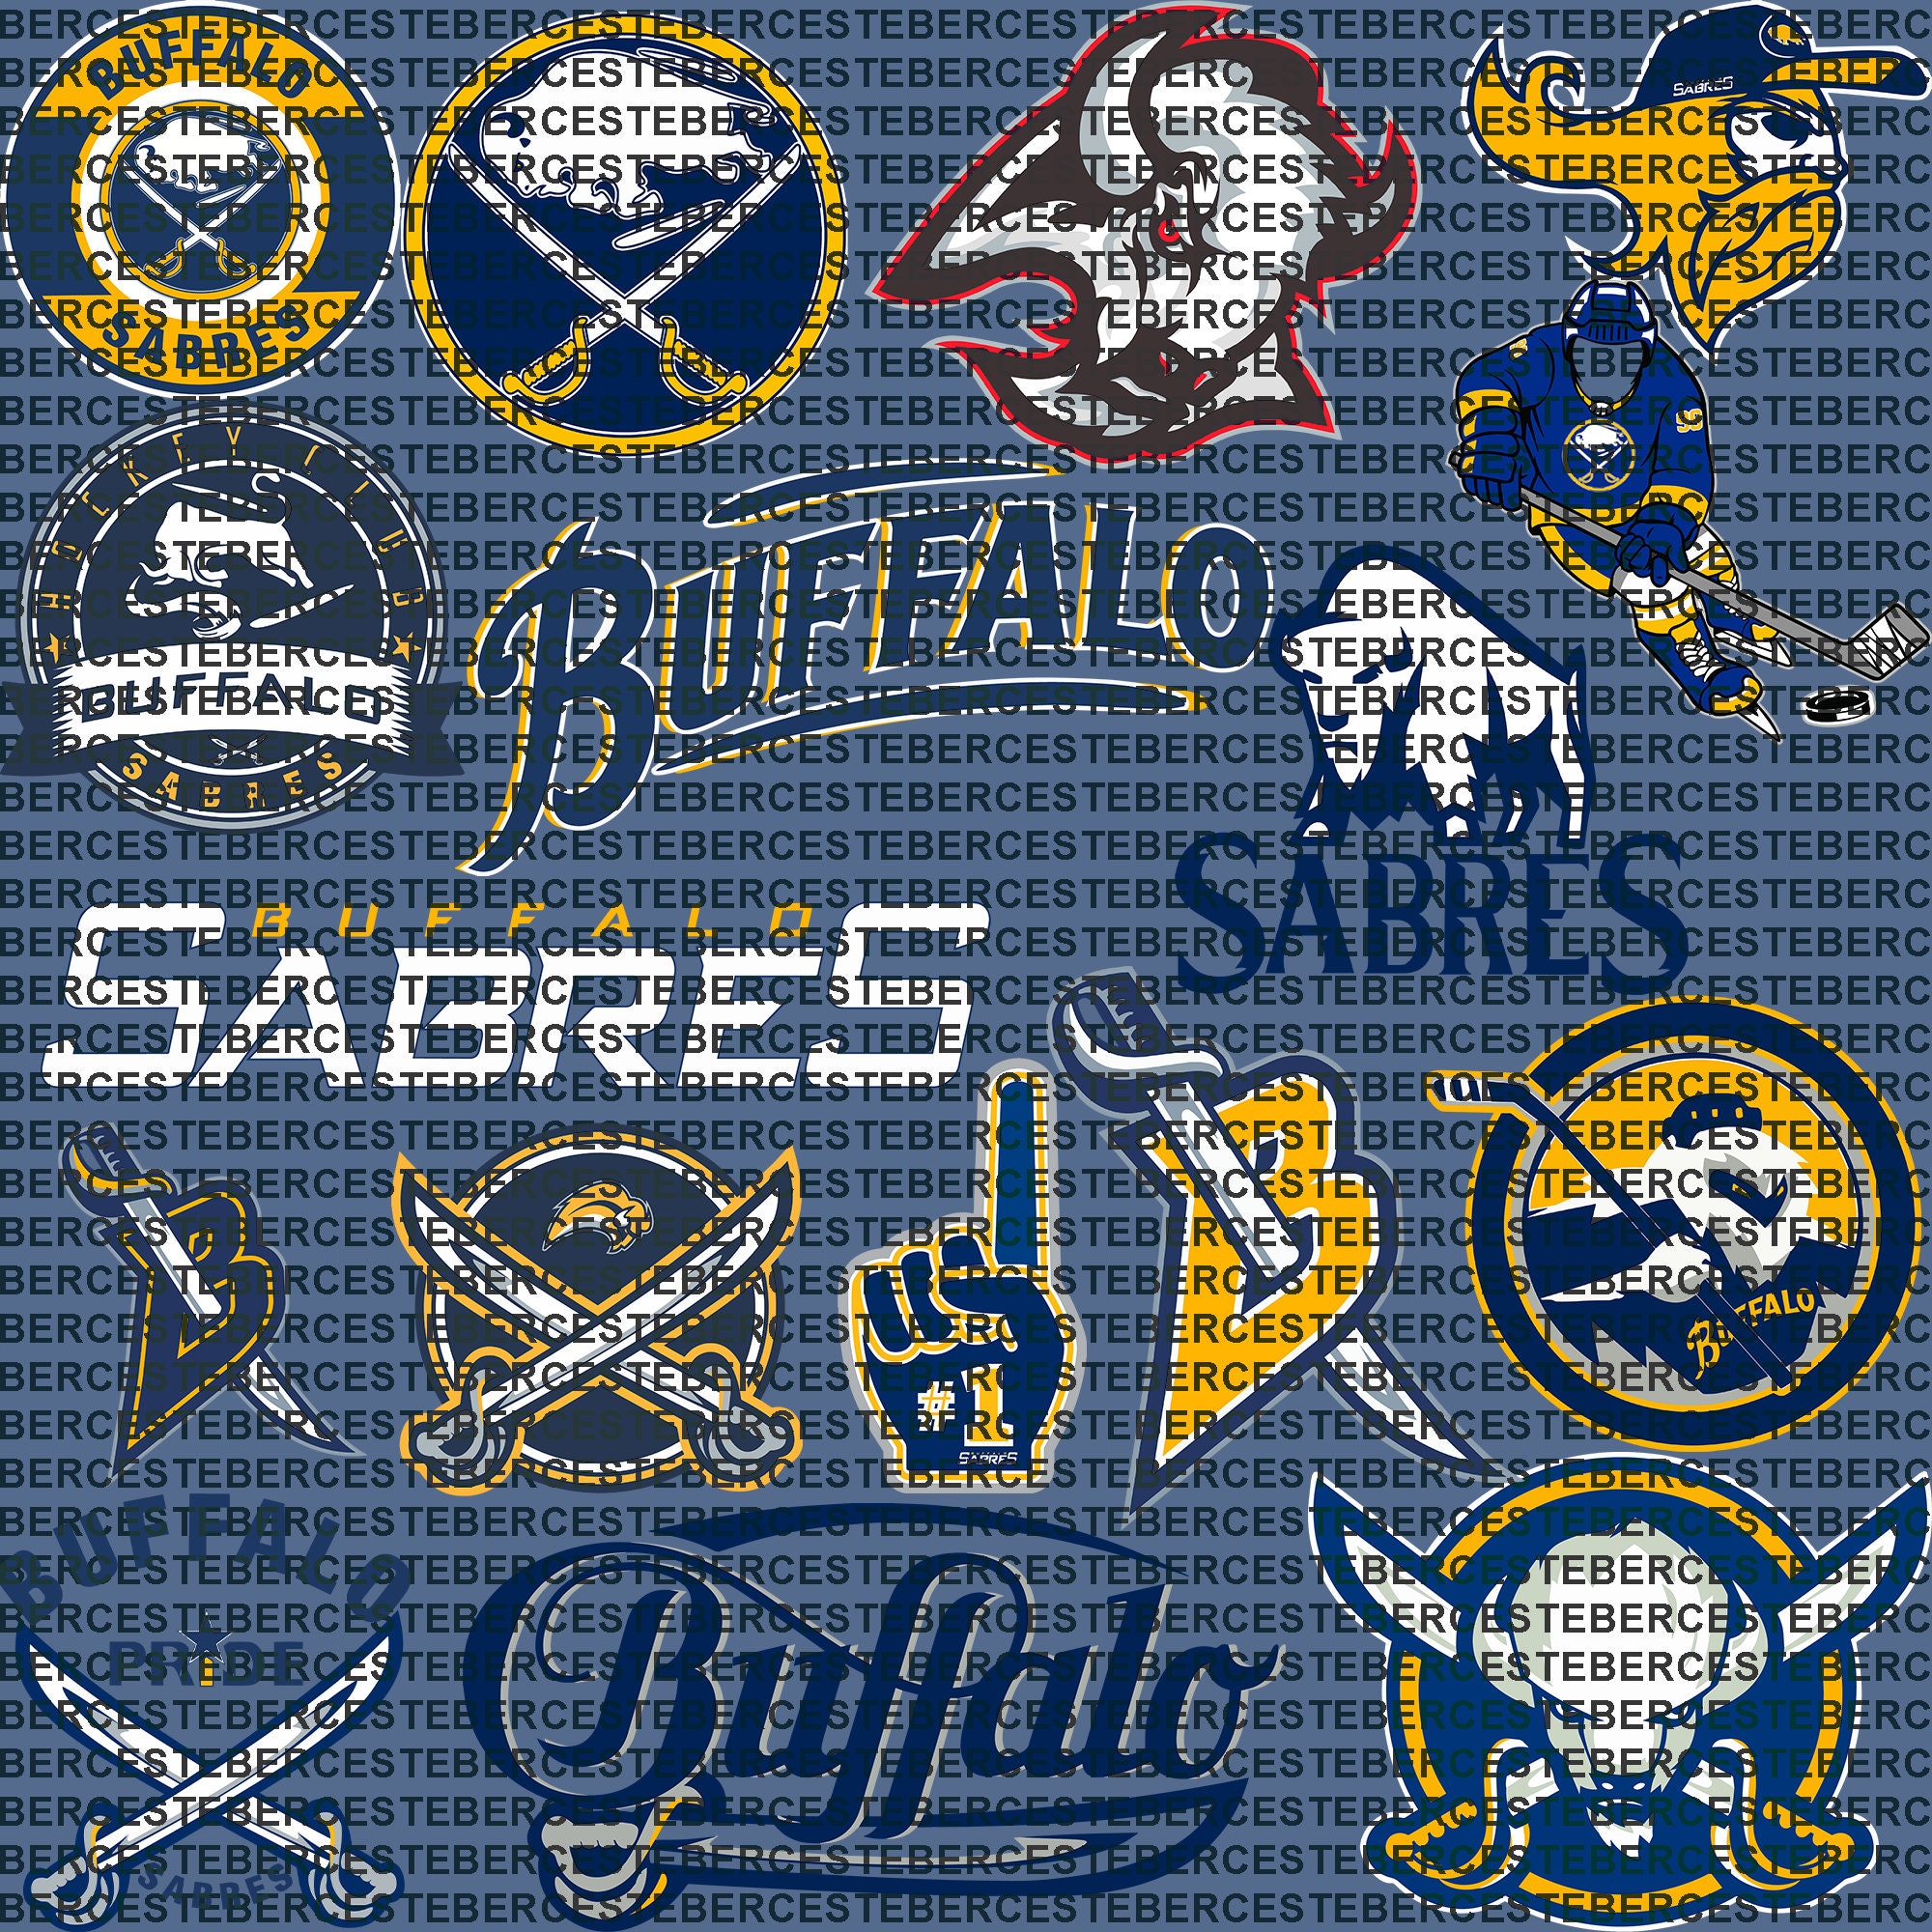 Buffalo Sabres goat head Reusable Static Cling Window Decal